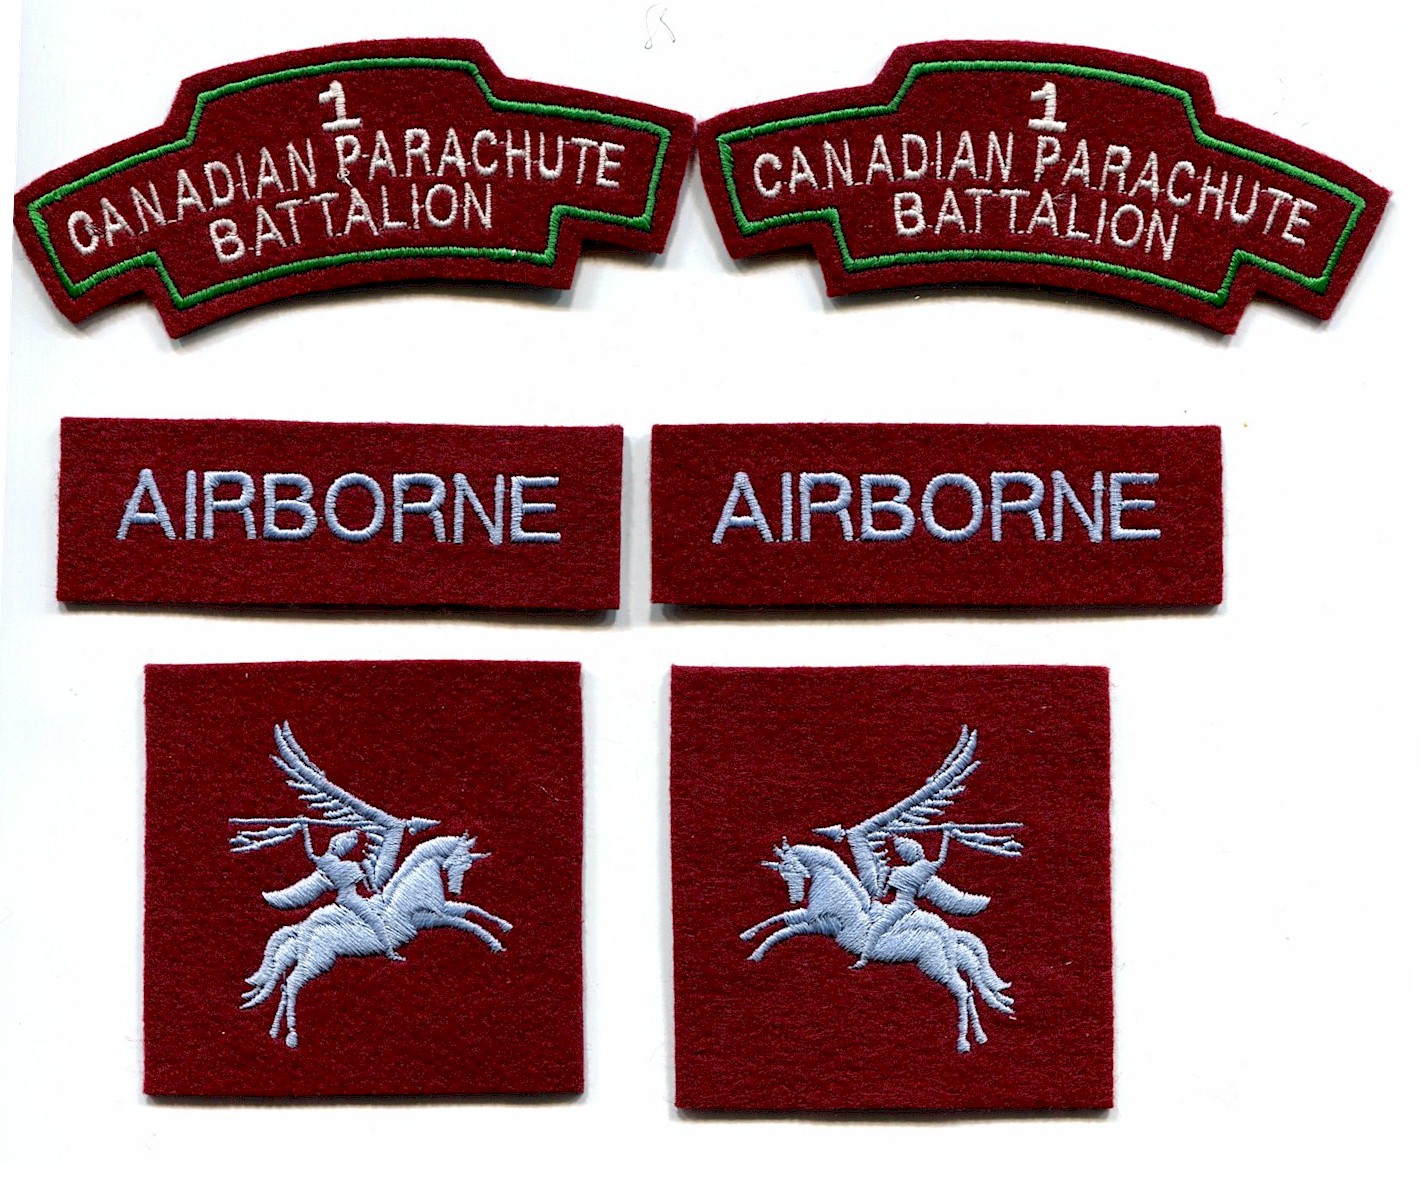 FIRST CANADIAN PARACHUTE BATTALION BADGES & PATCHES - SET OF 6